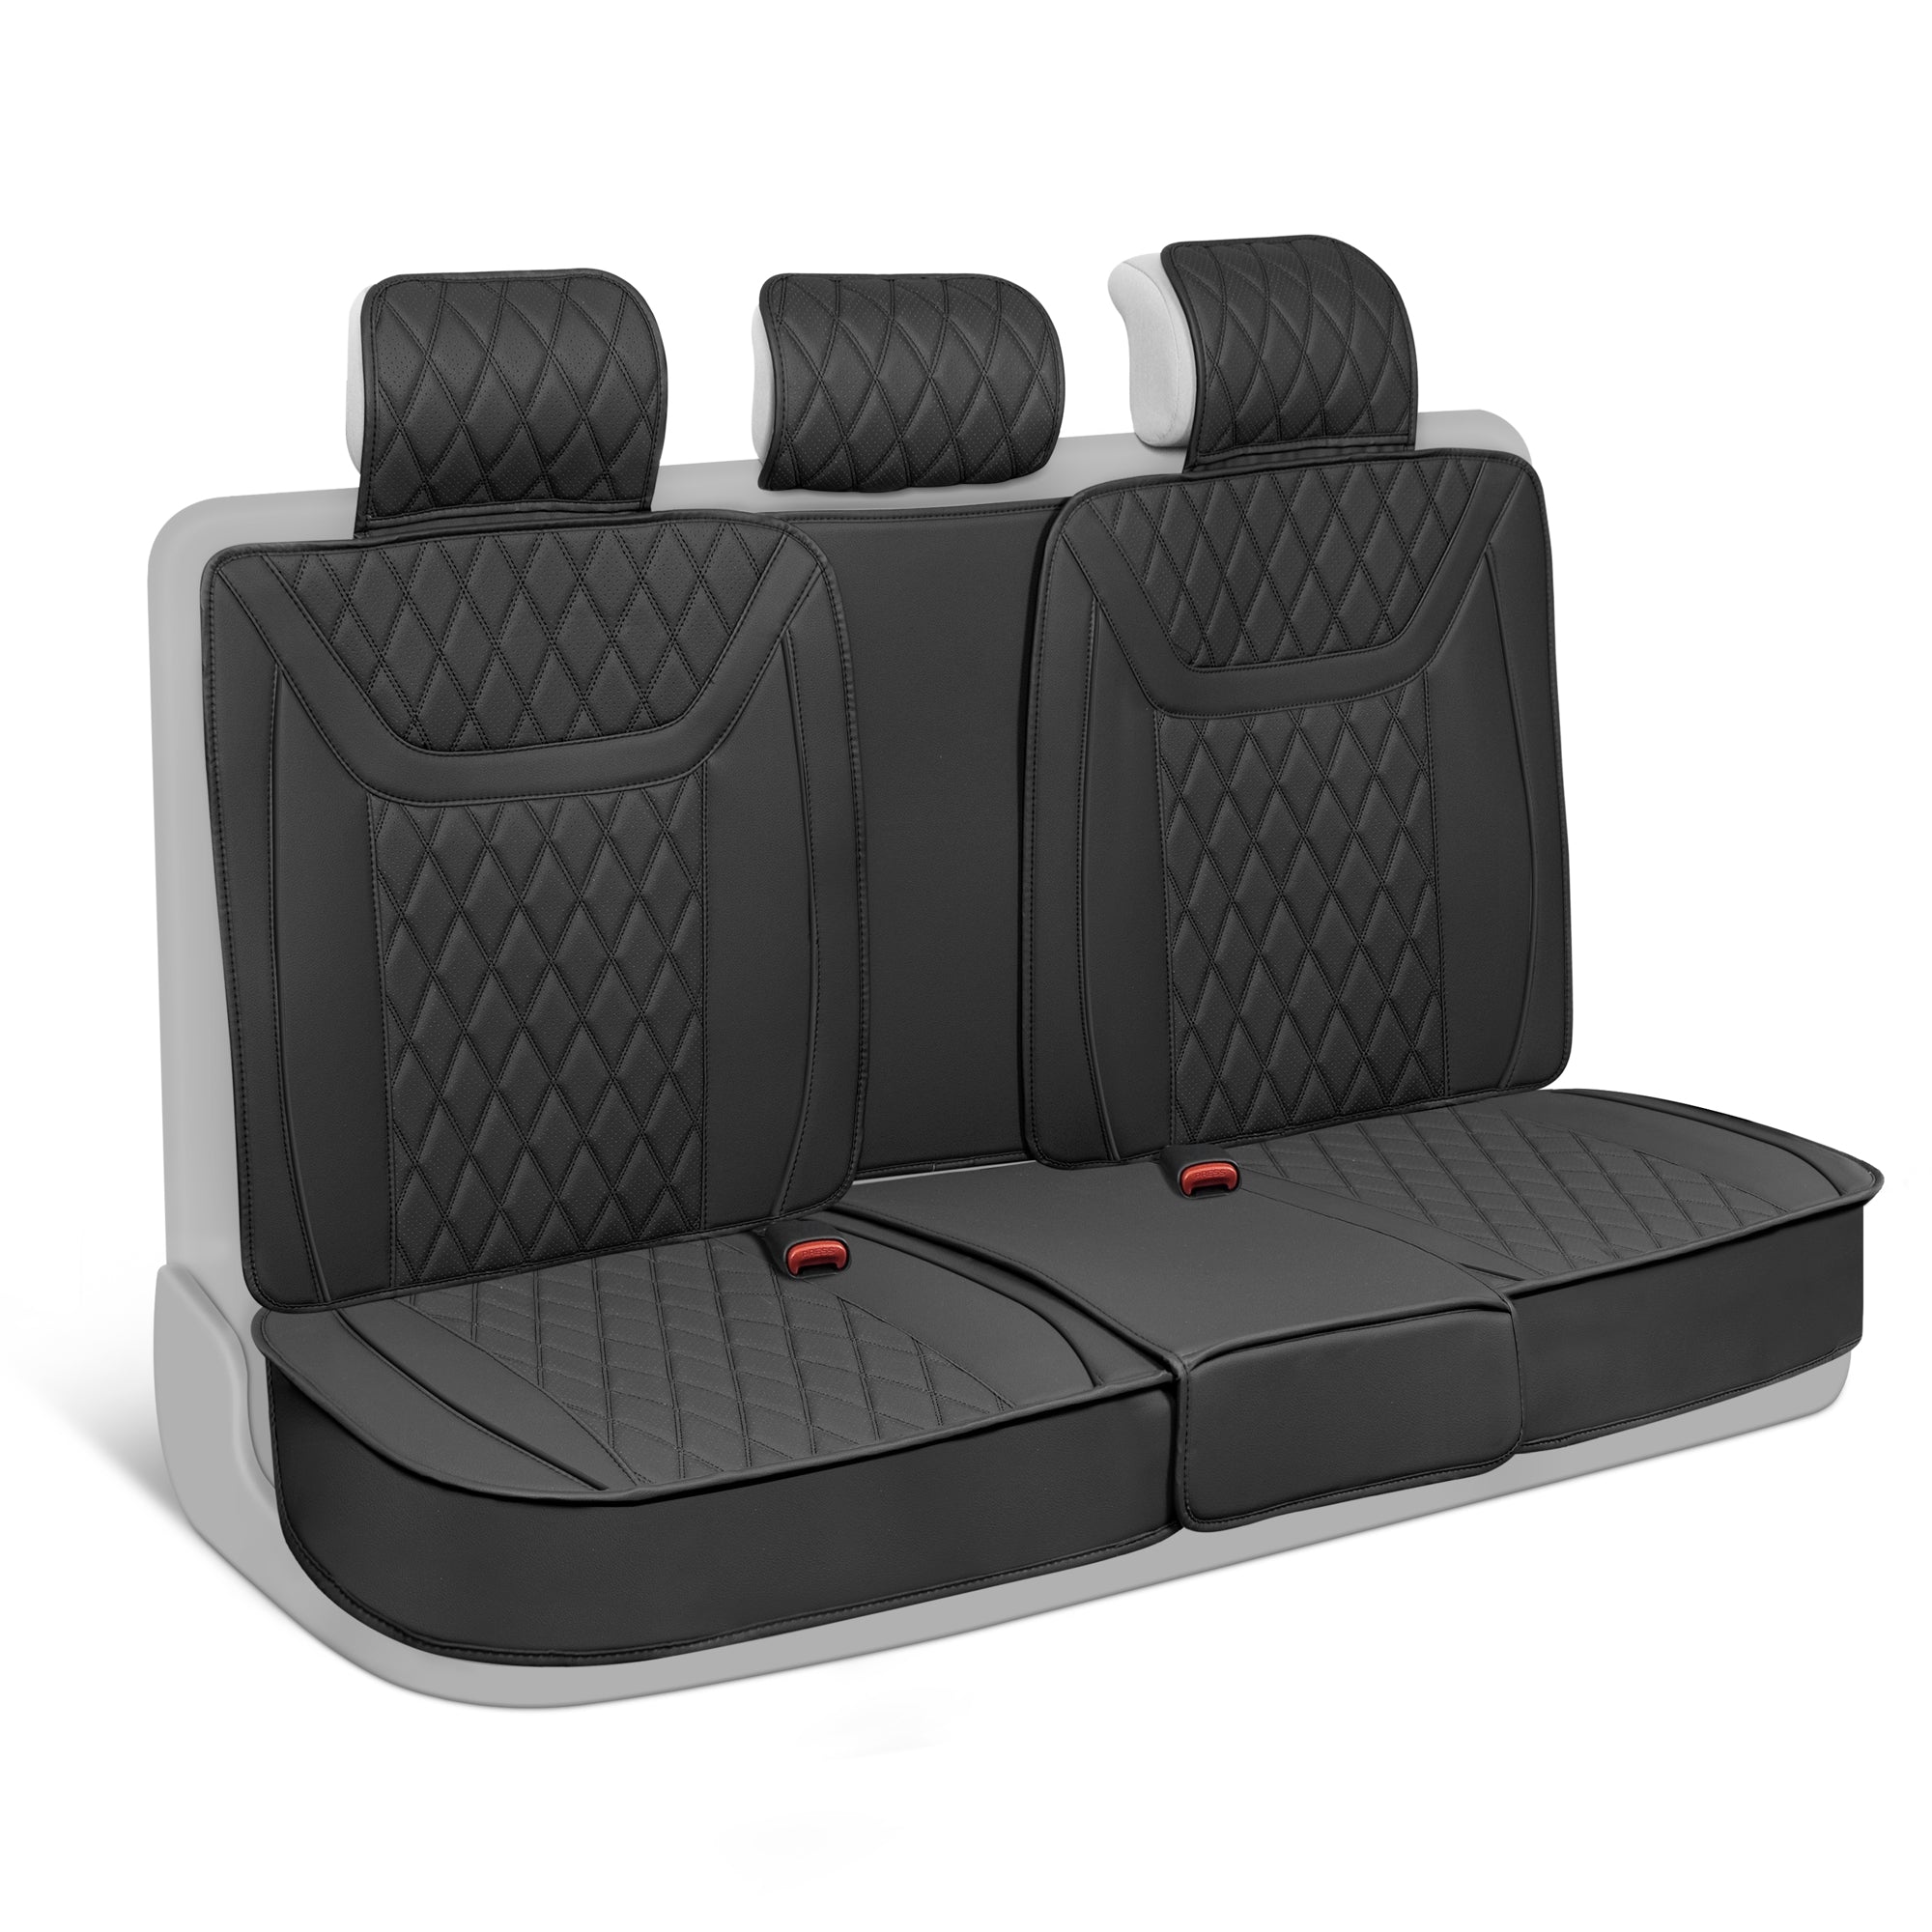 MotorBox Rear Car Seat Cover – Ranch Leatherette Faux Leather Black Bench Seat Cover for Auto – Diamond Stitched Cushioned Seat Protectors for Automotive Accessories, Trucks, SUV, Car – Backseat Cover - Black